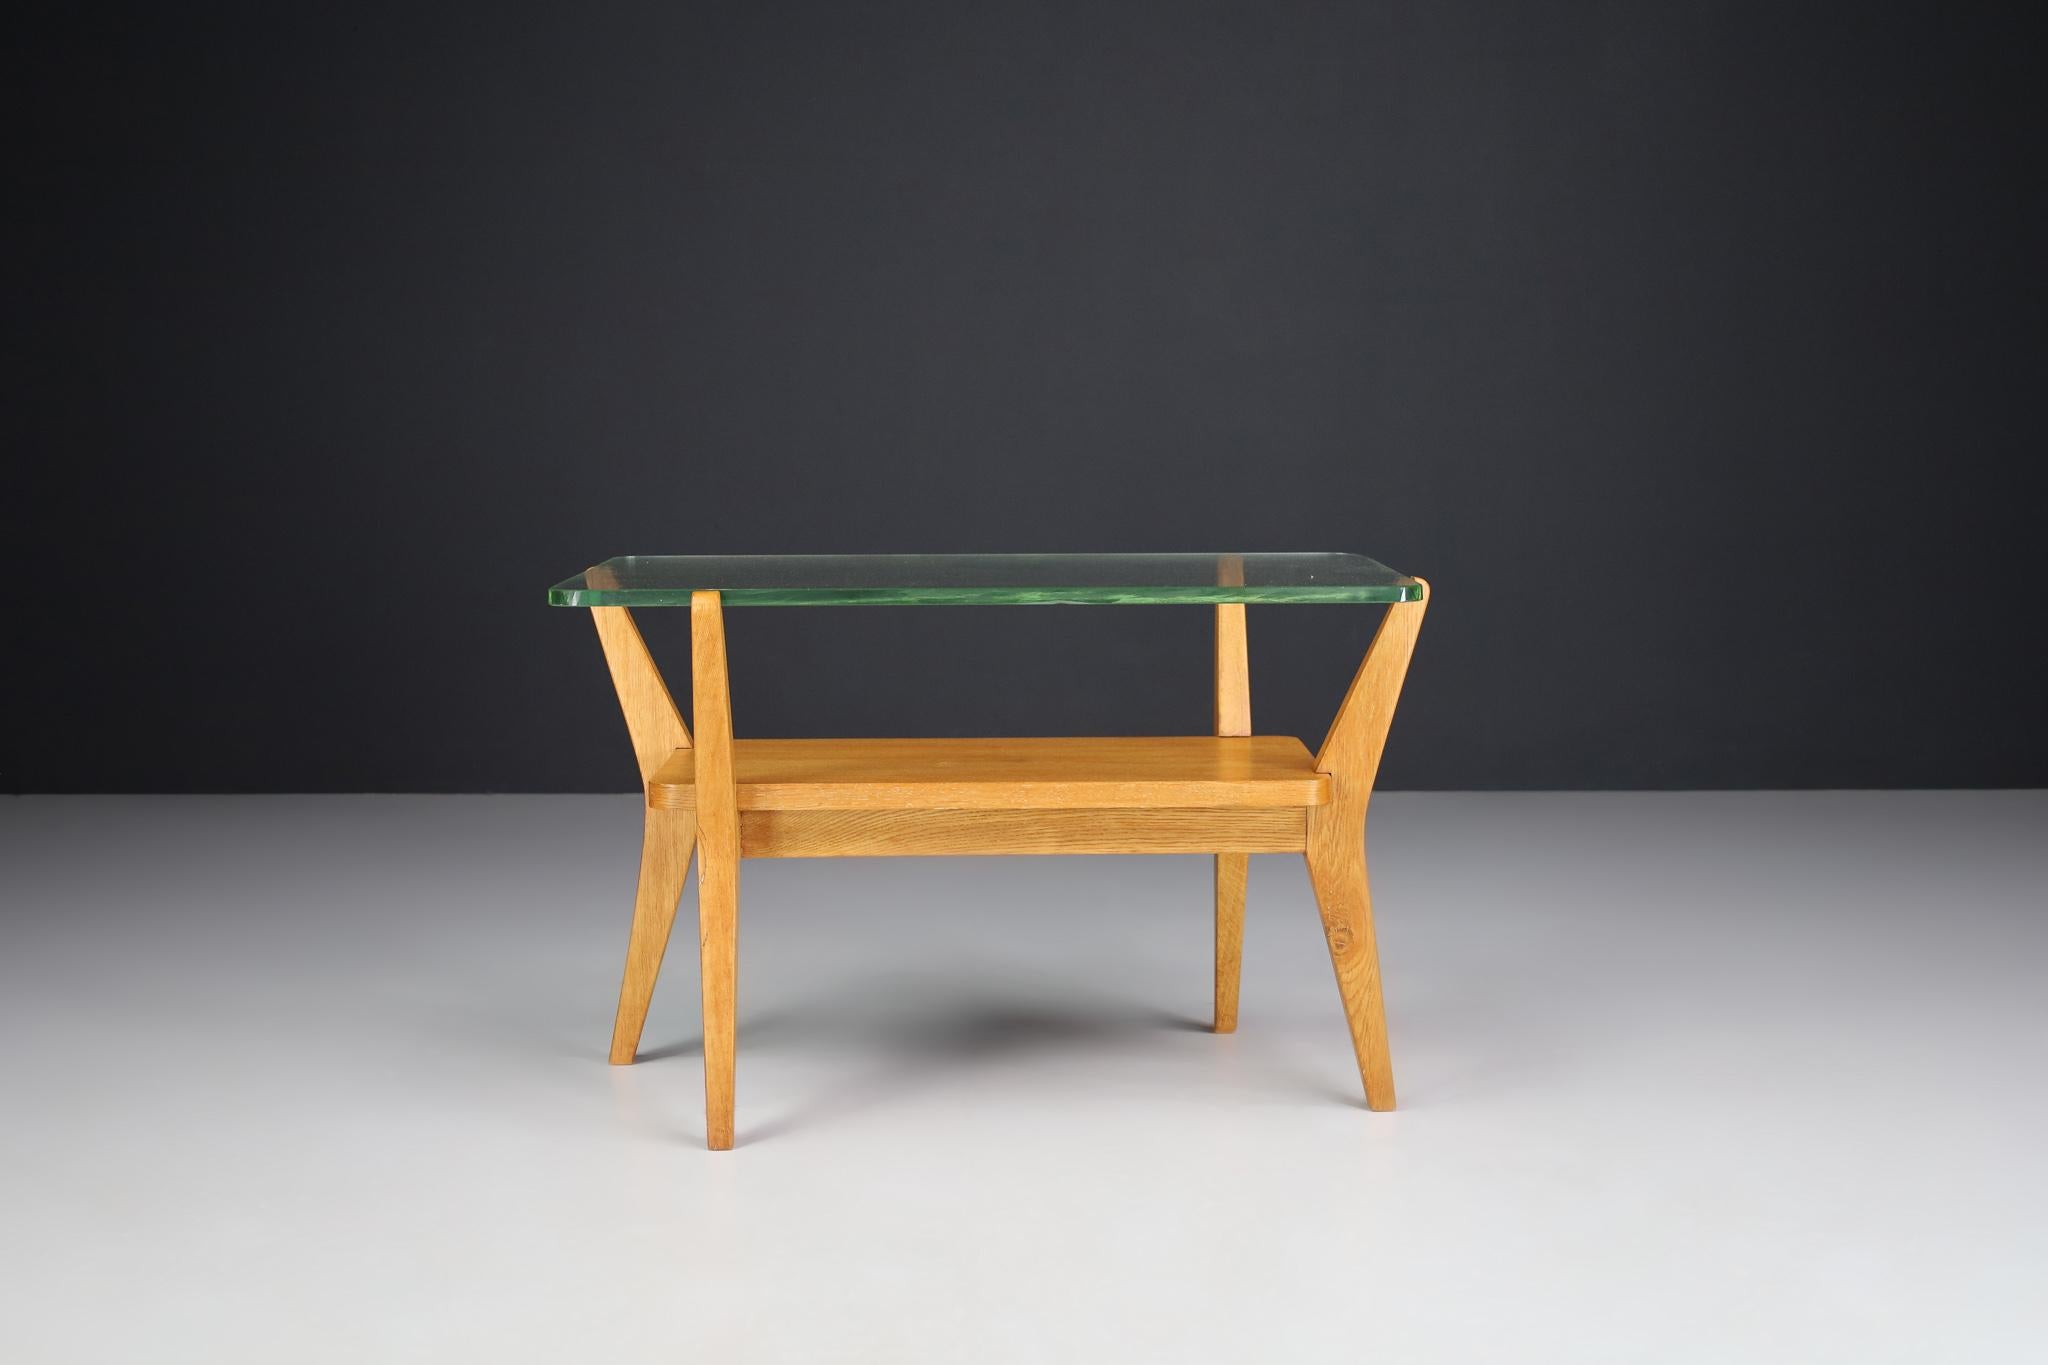 Mid-Century Modern Ash Wood and Glass Coffee Table, Praque, 1950s For Sale 1